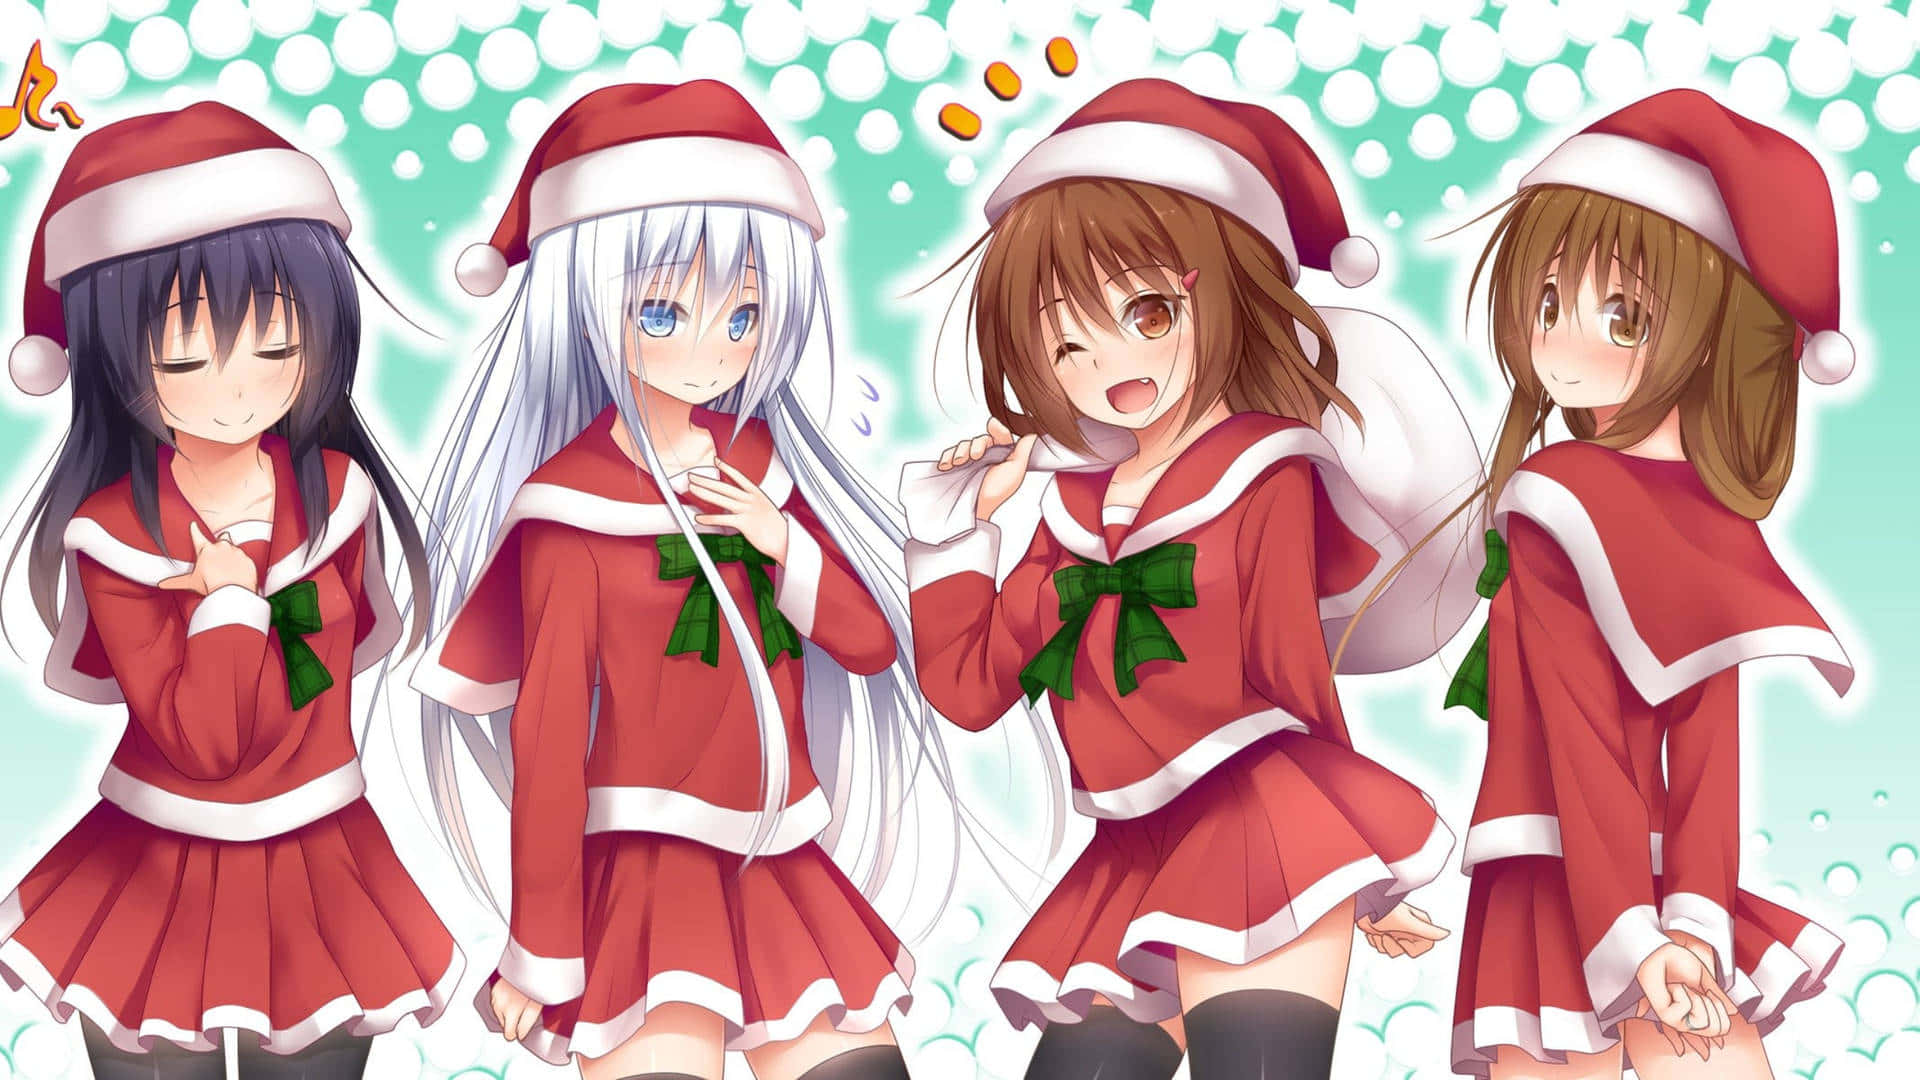 Friends and family come together to celebrate the holiday season with fun and festive Anime-style!